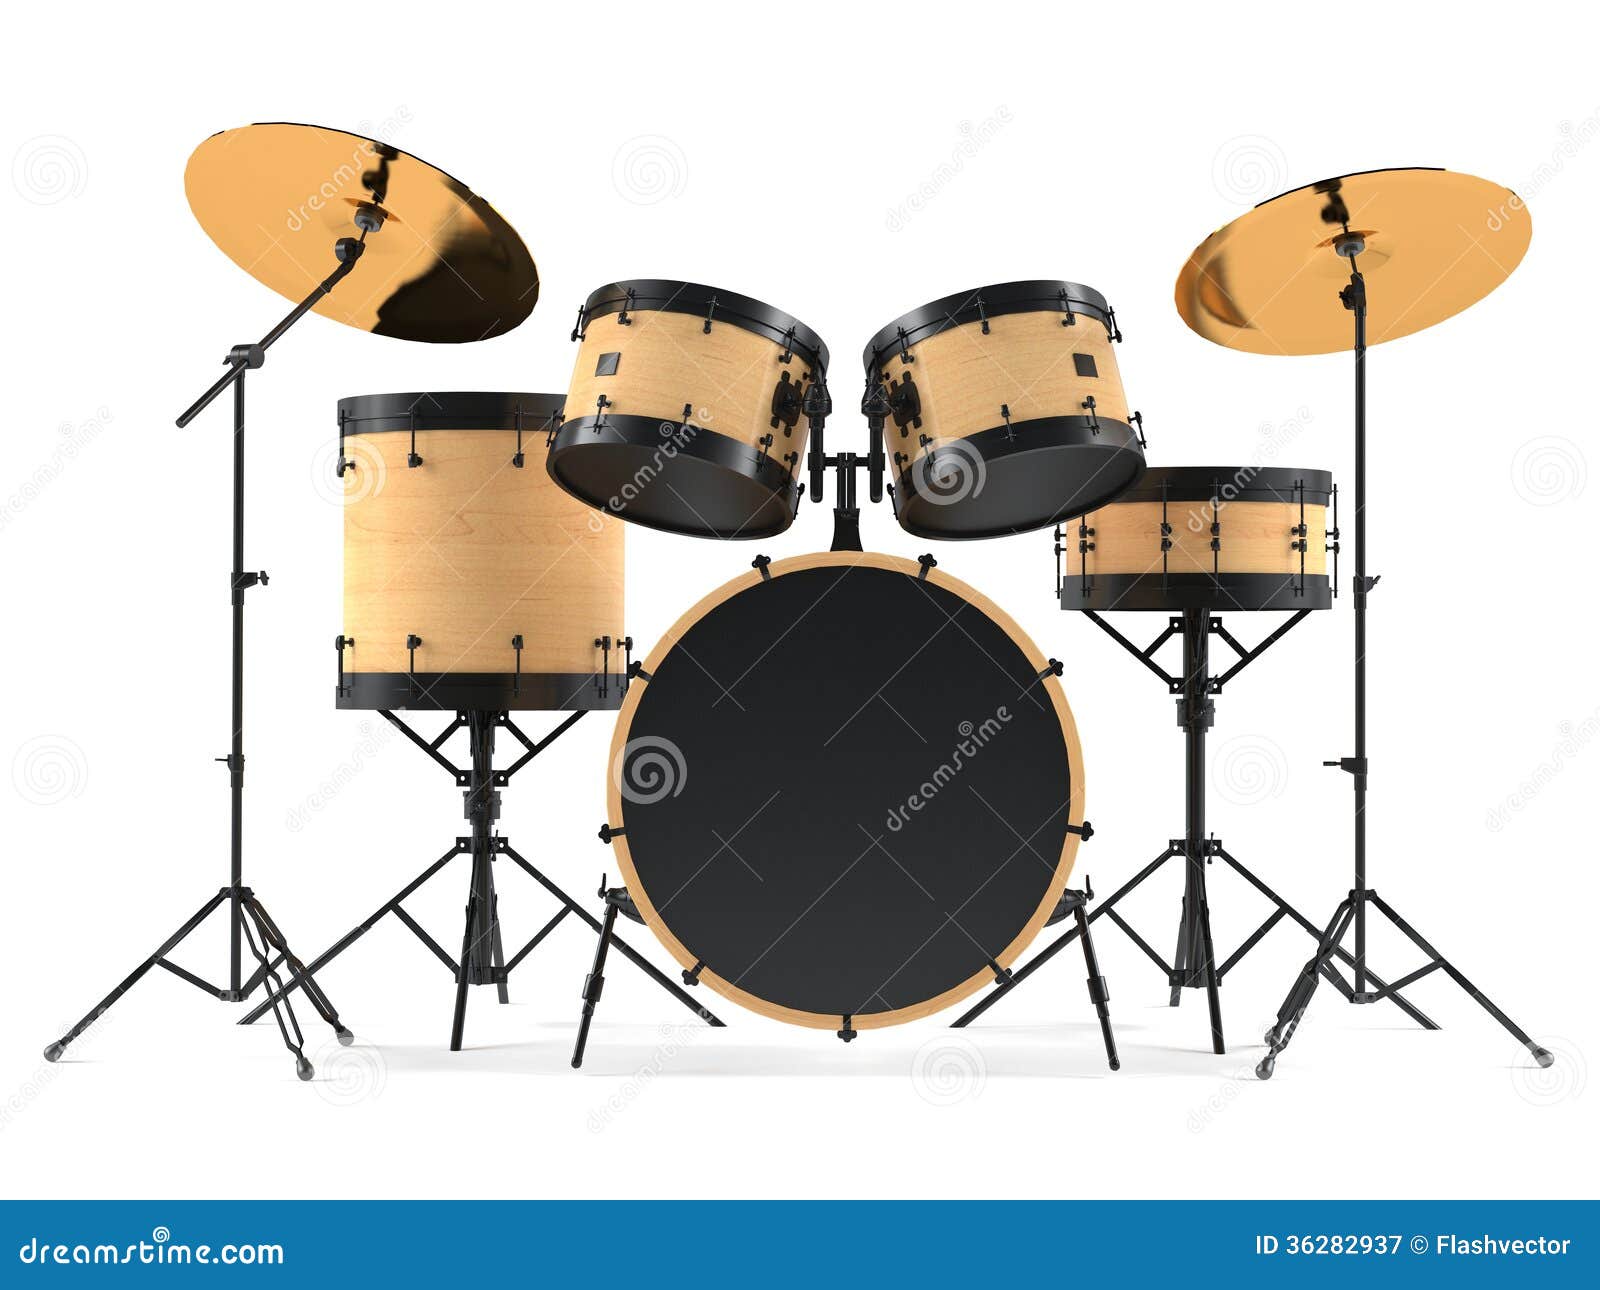 Wooden Drums Isolated. Black Drum Kit. Royalty Free Stock Photography 